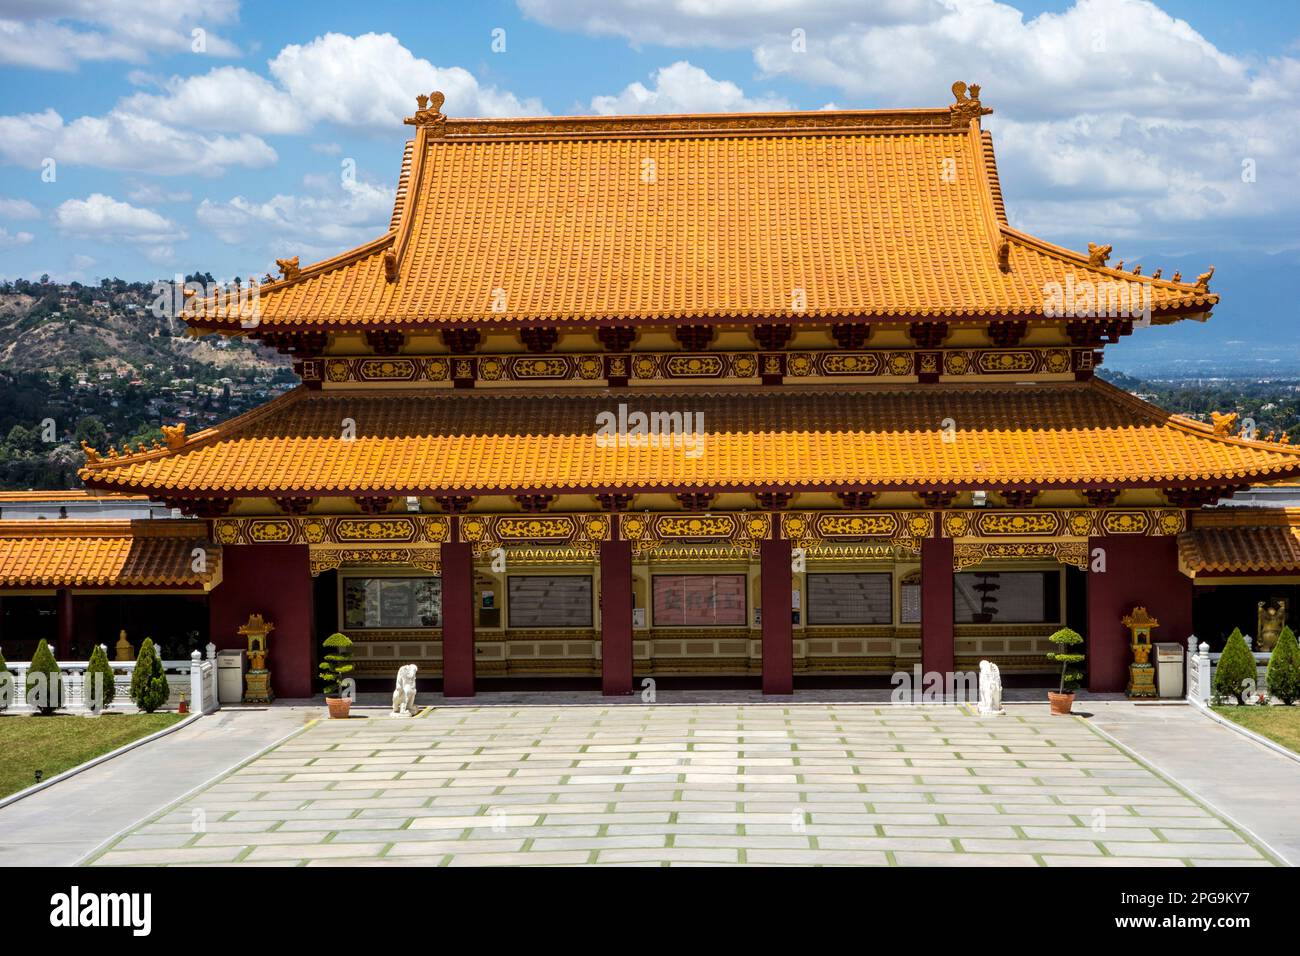 Hsi Lai Temple, city of Hacienda Heights, Los Angeles County, California, United States of America Stock Photo